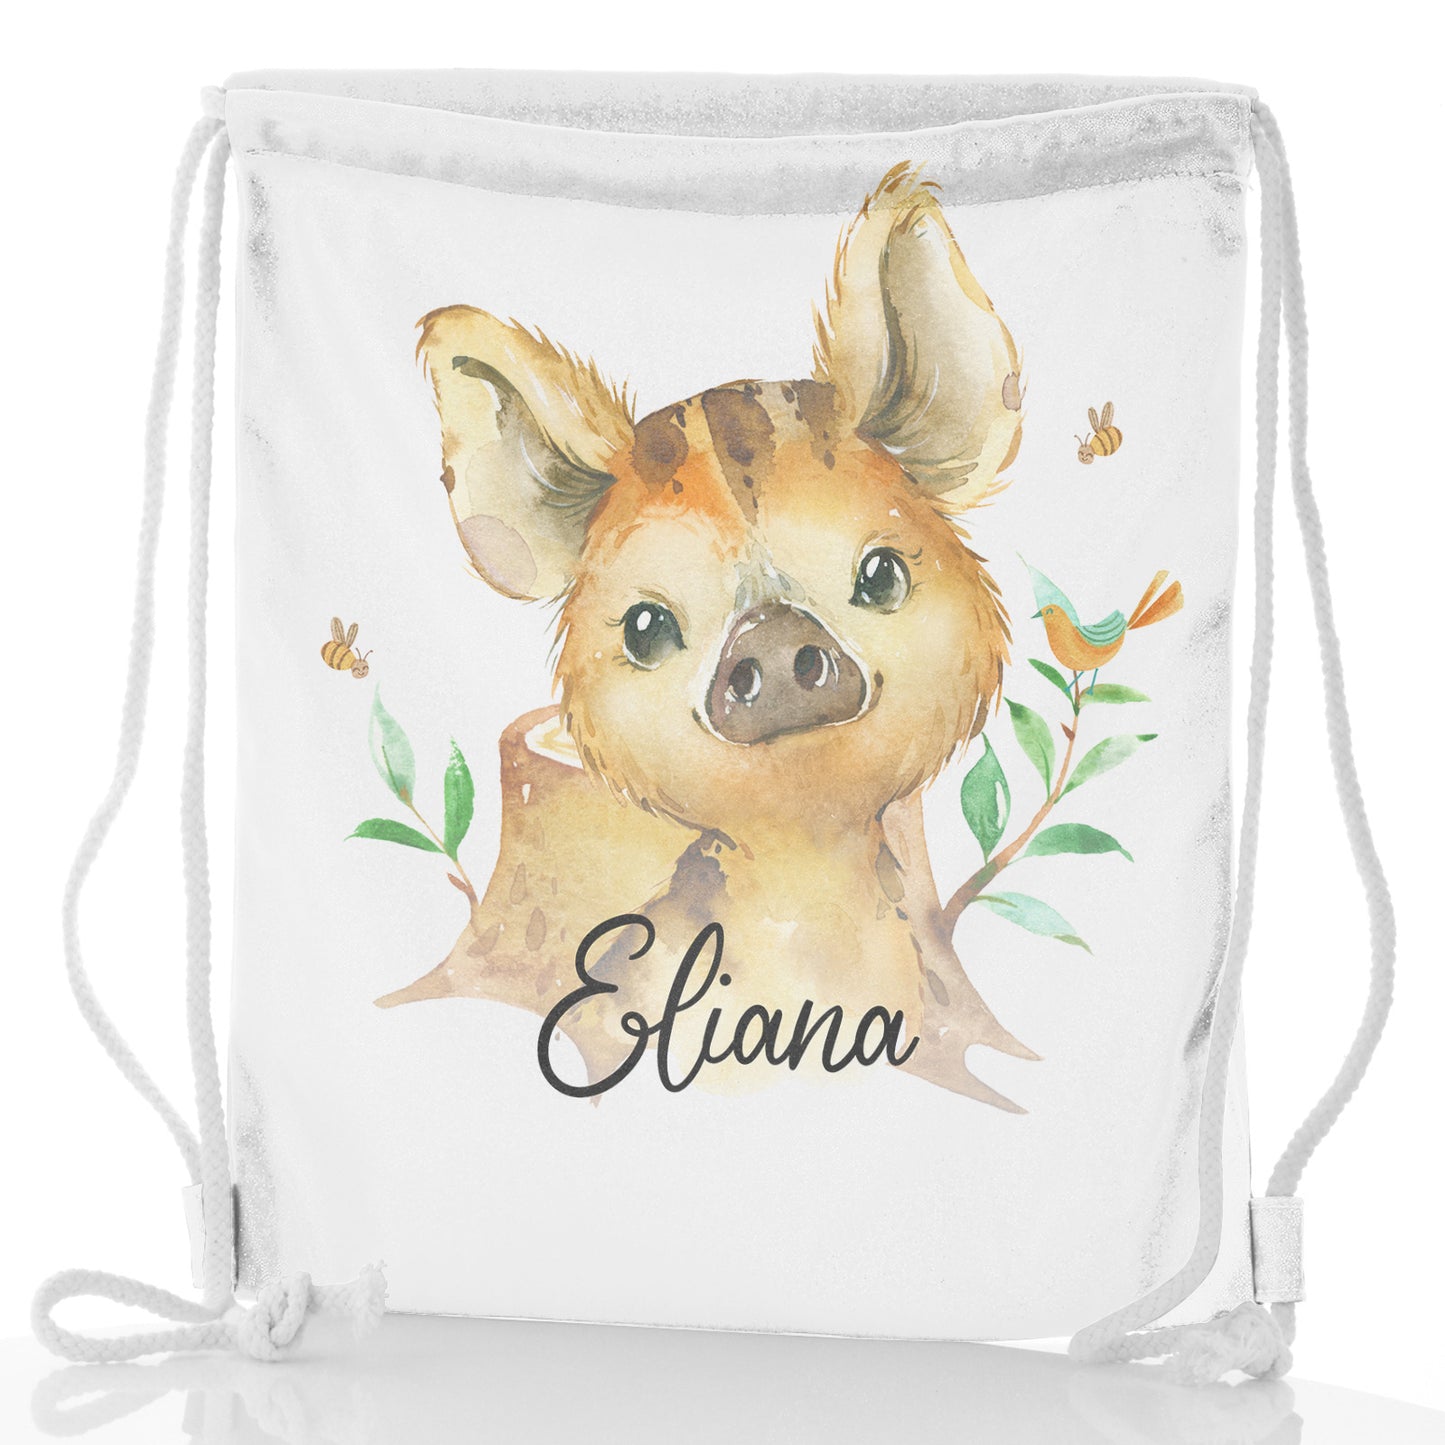 Personalised Glitter Drawstring Backpack with Wild Boar Piglet with Bird and Bees and Cute Text